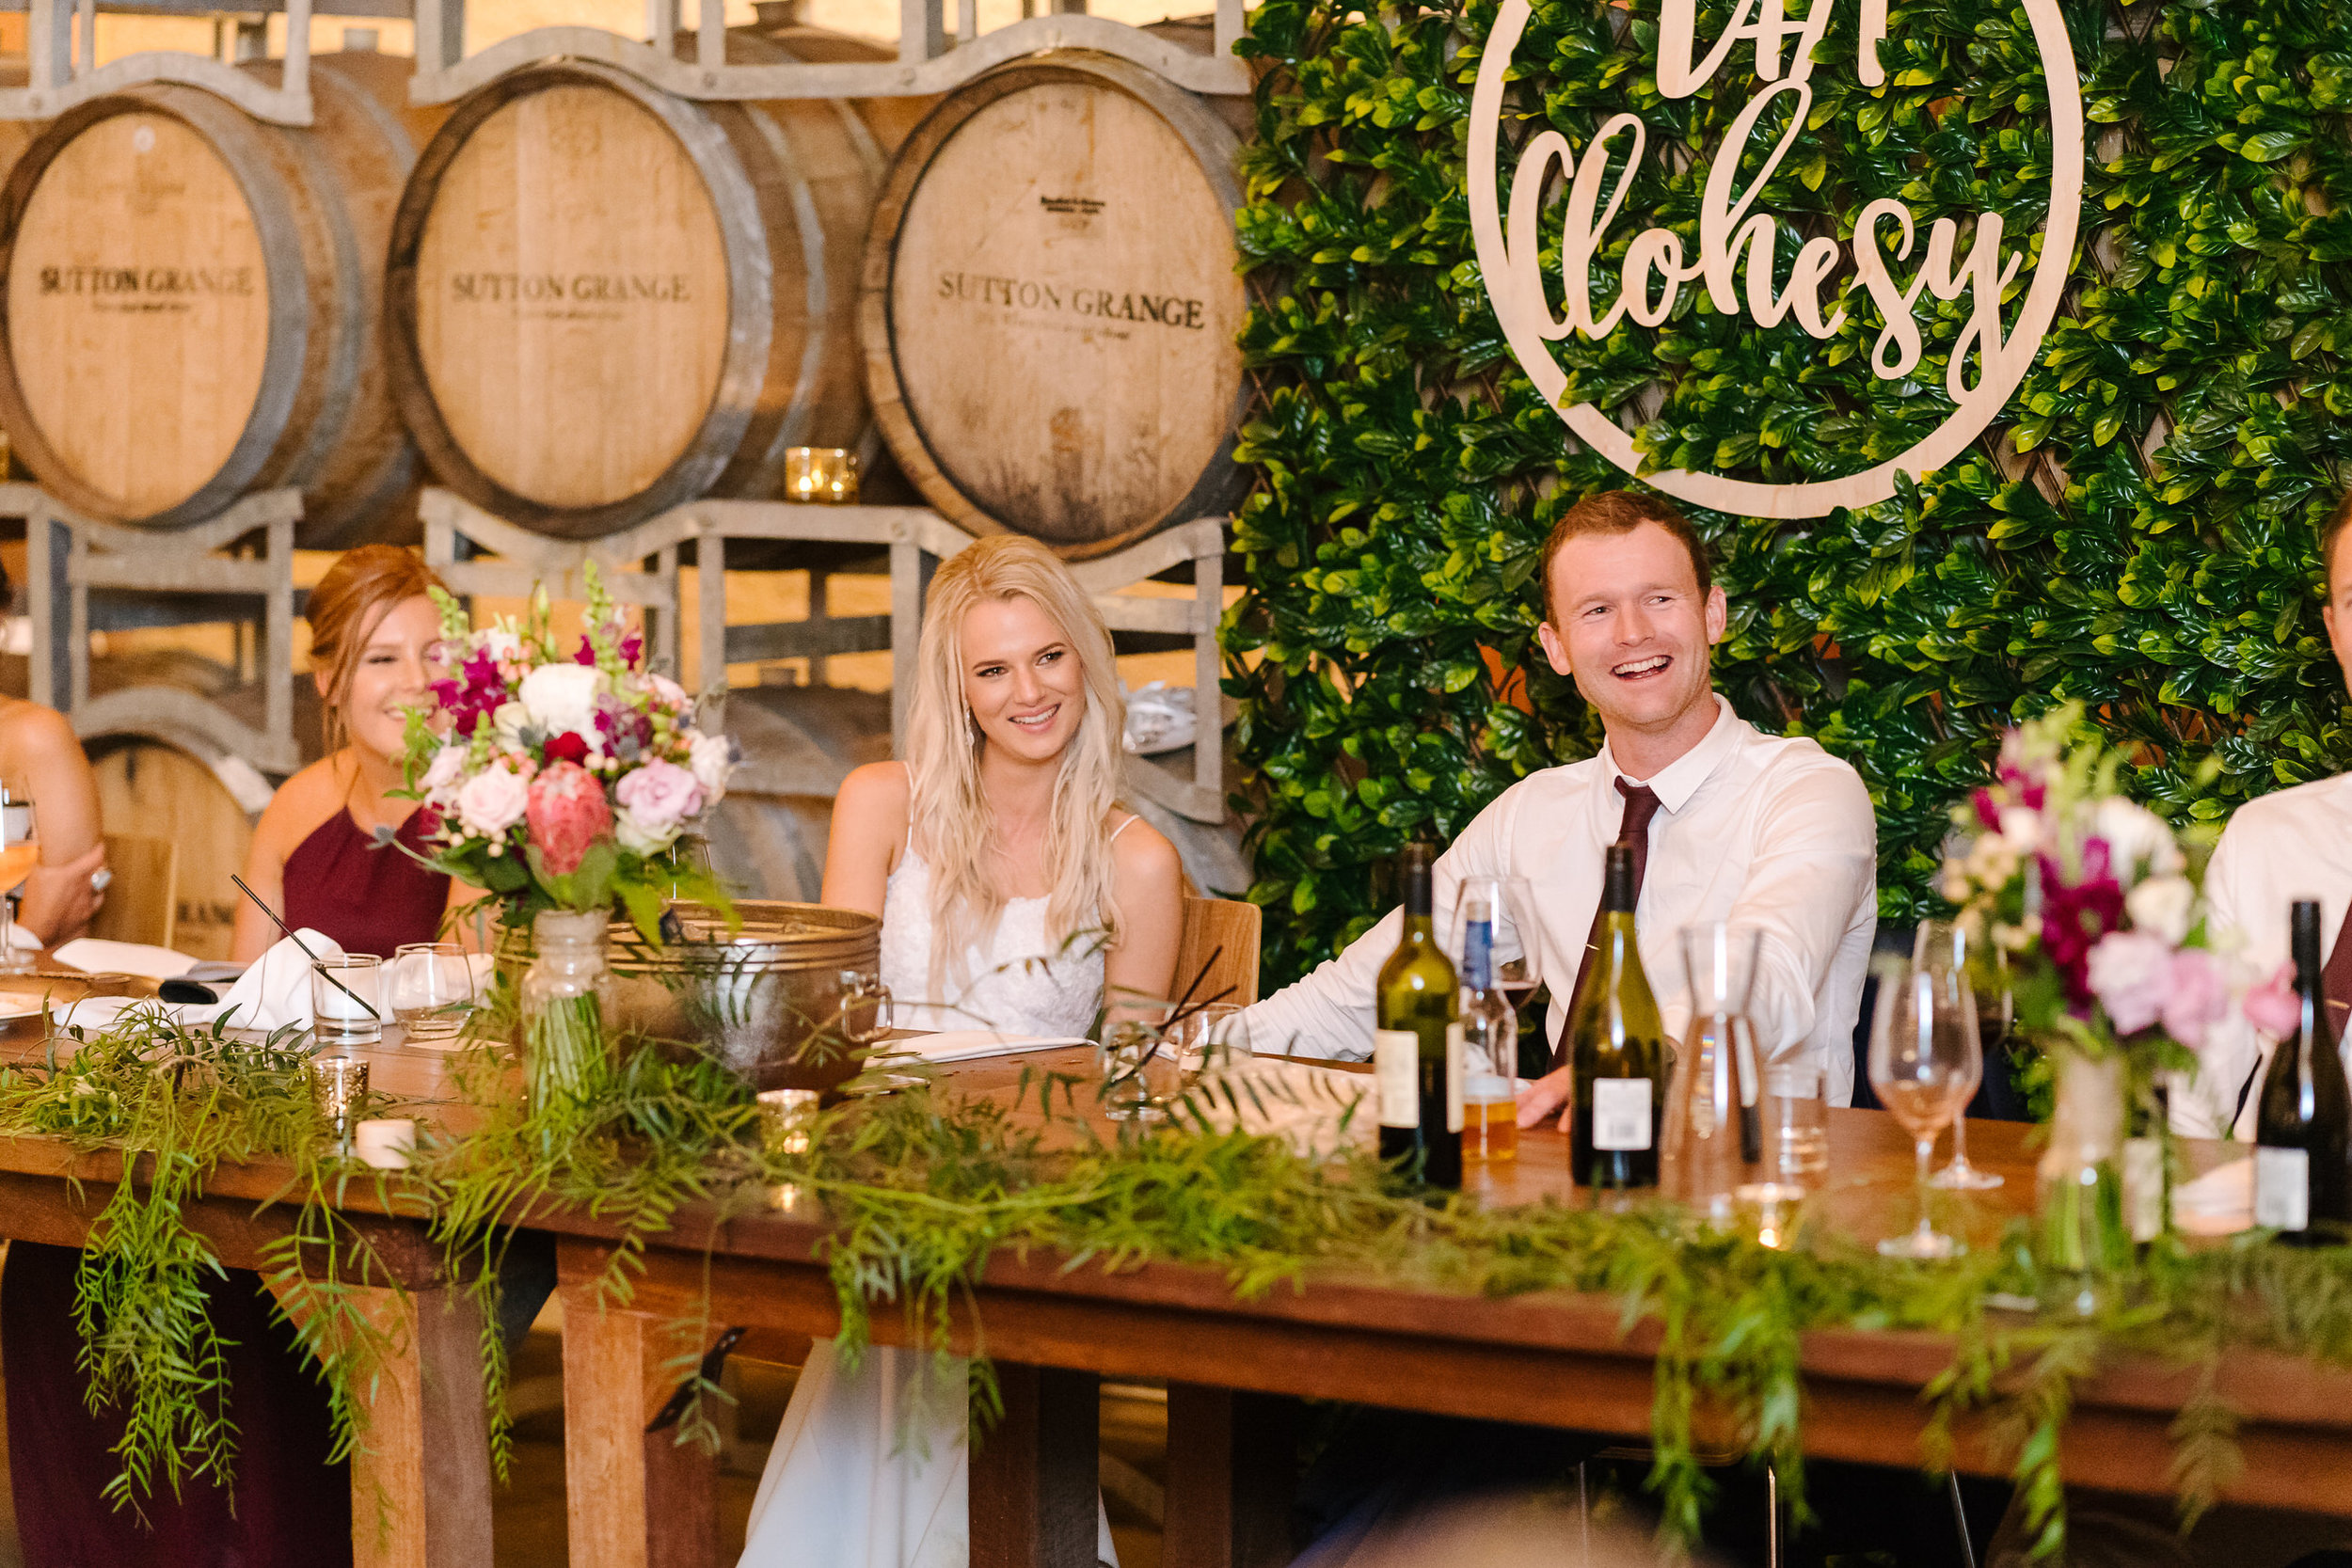 Justin_And_Jim_Photography_Sutton_Grange_Winery111.JPG